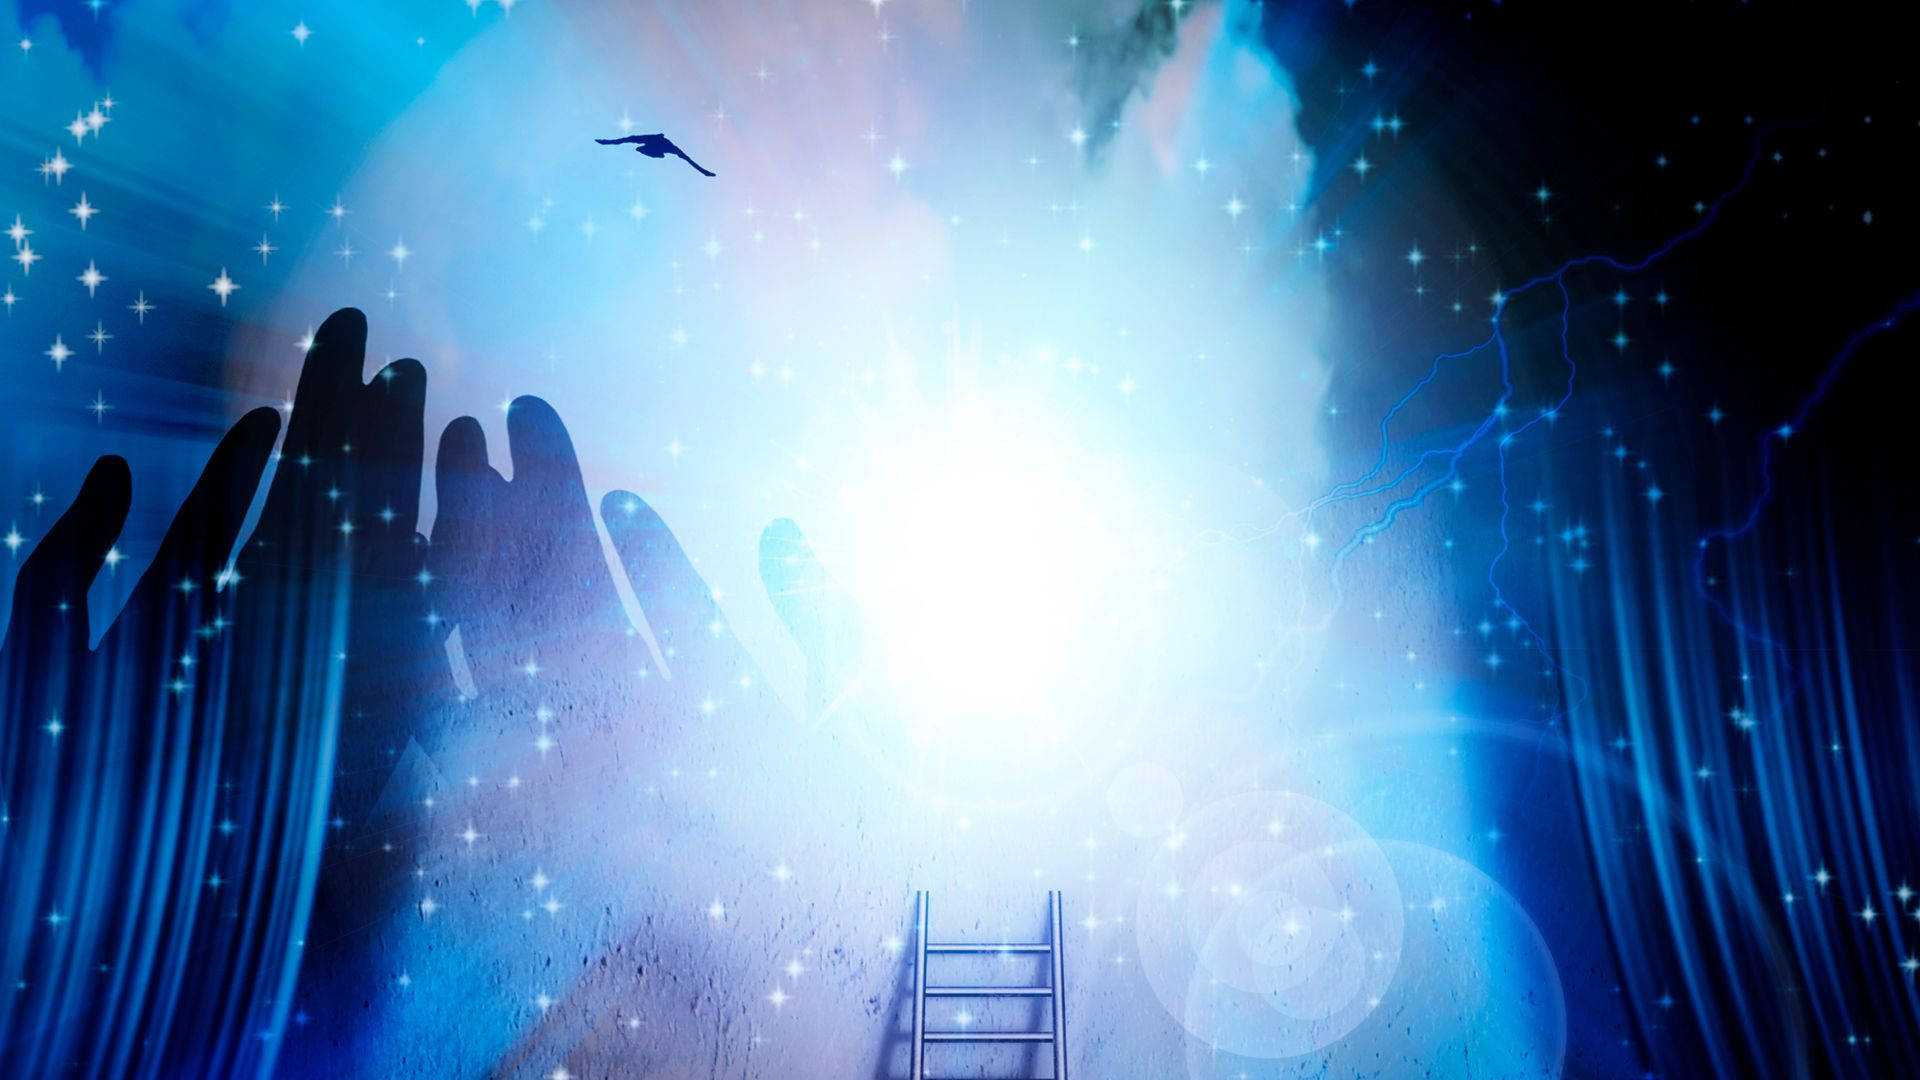 A Ladder To The Spirit Realm Wallpaper